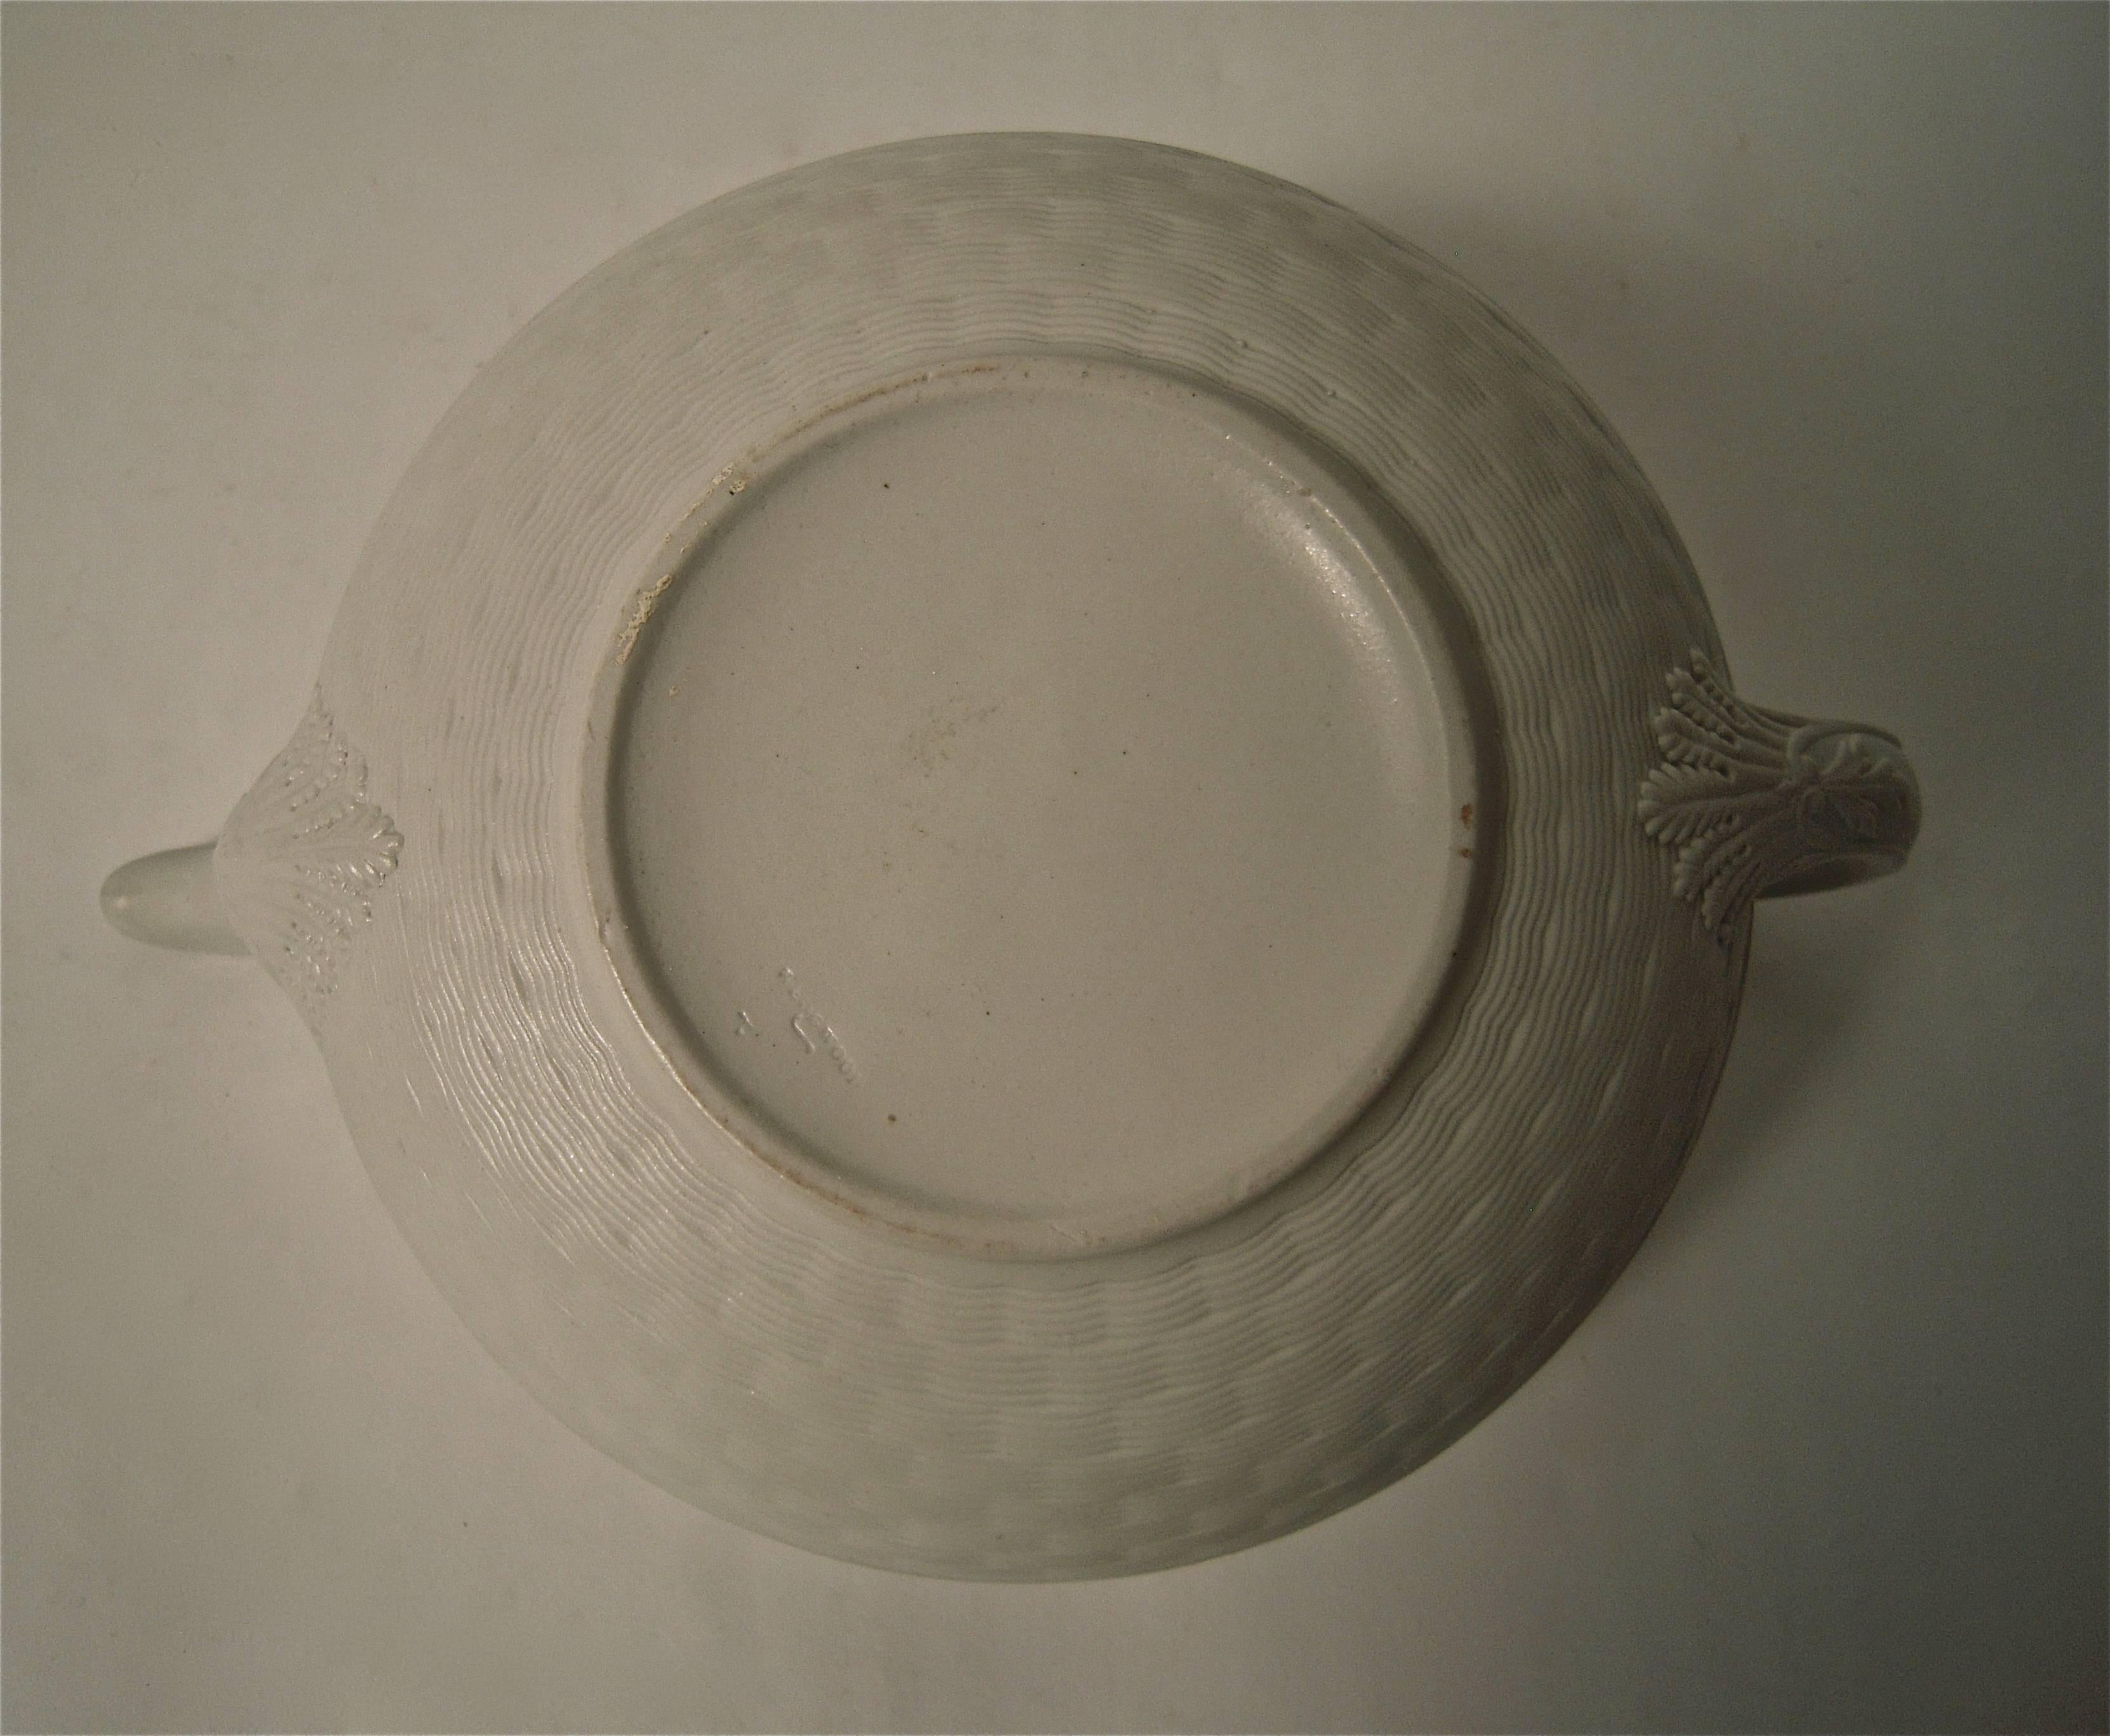 Molded Wedgwood 19th Century Basket Weave Stoneware Tea Pot with Sheaf of Wheat Finial